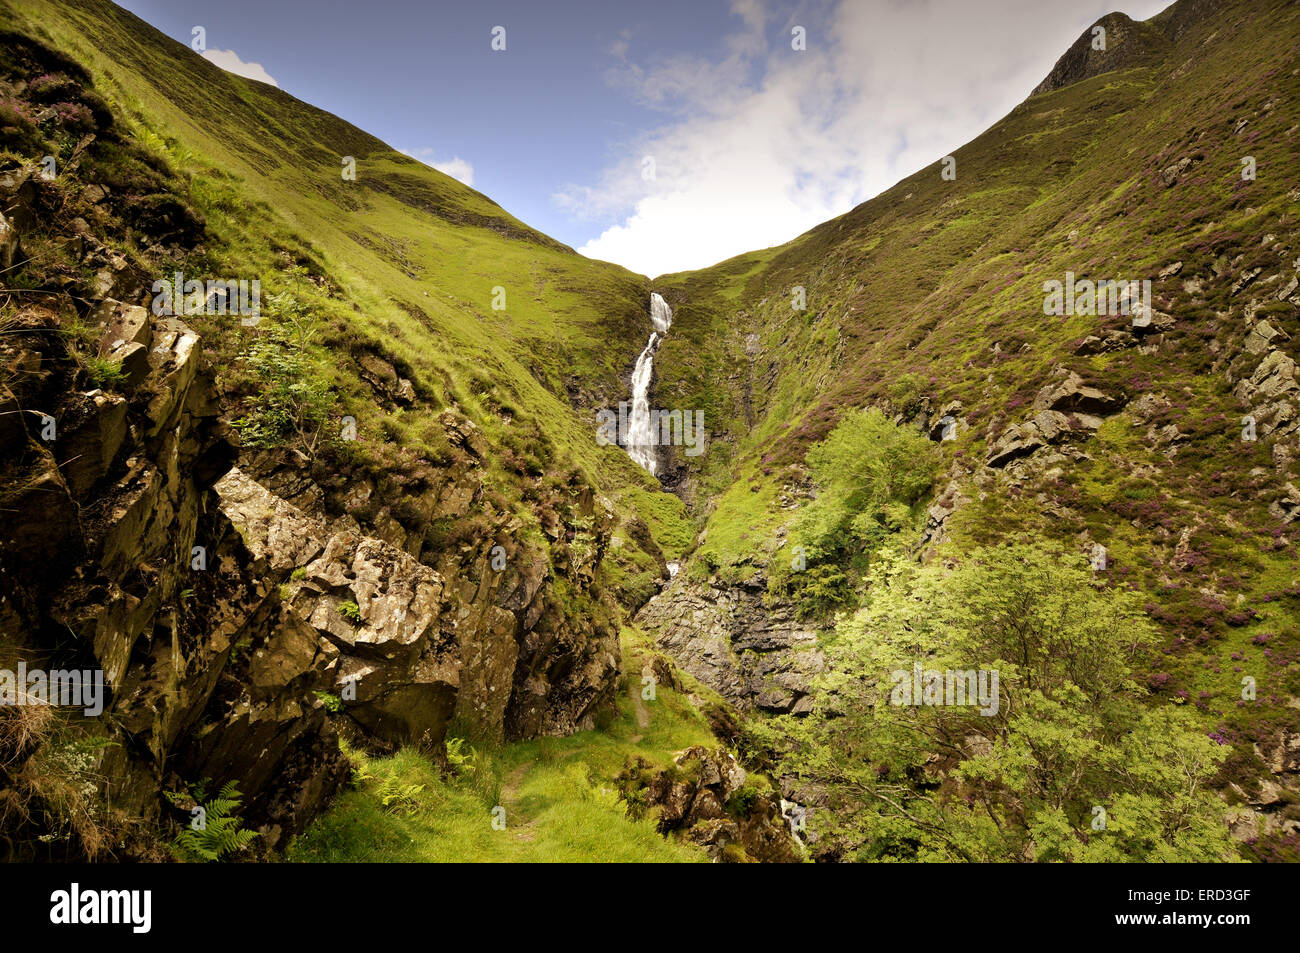 The Grey Mare's Tail waterfall near Moffat, Dumfries and Galloway. Stock Photo